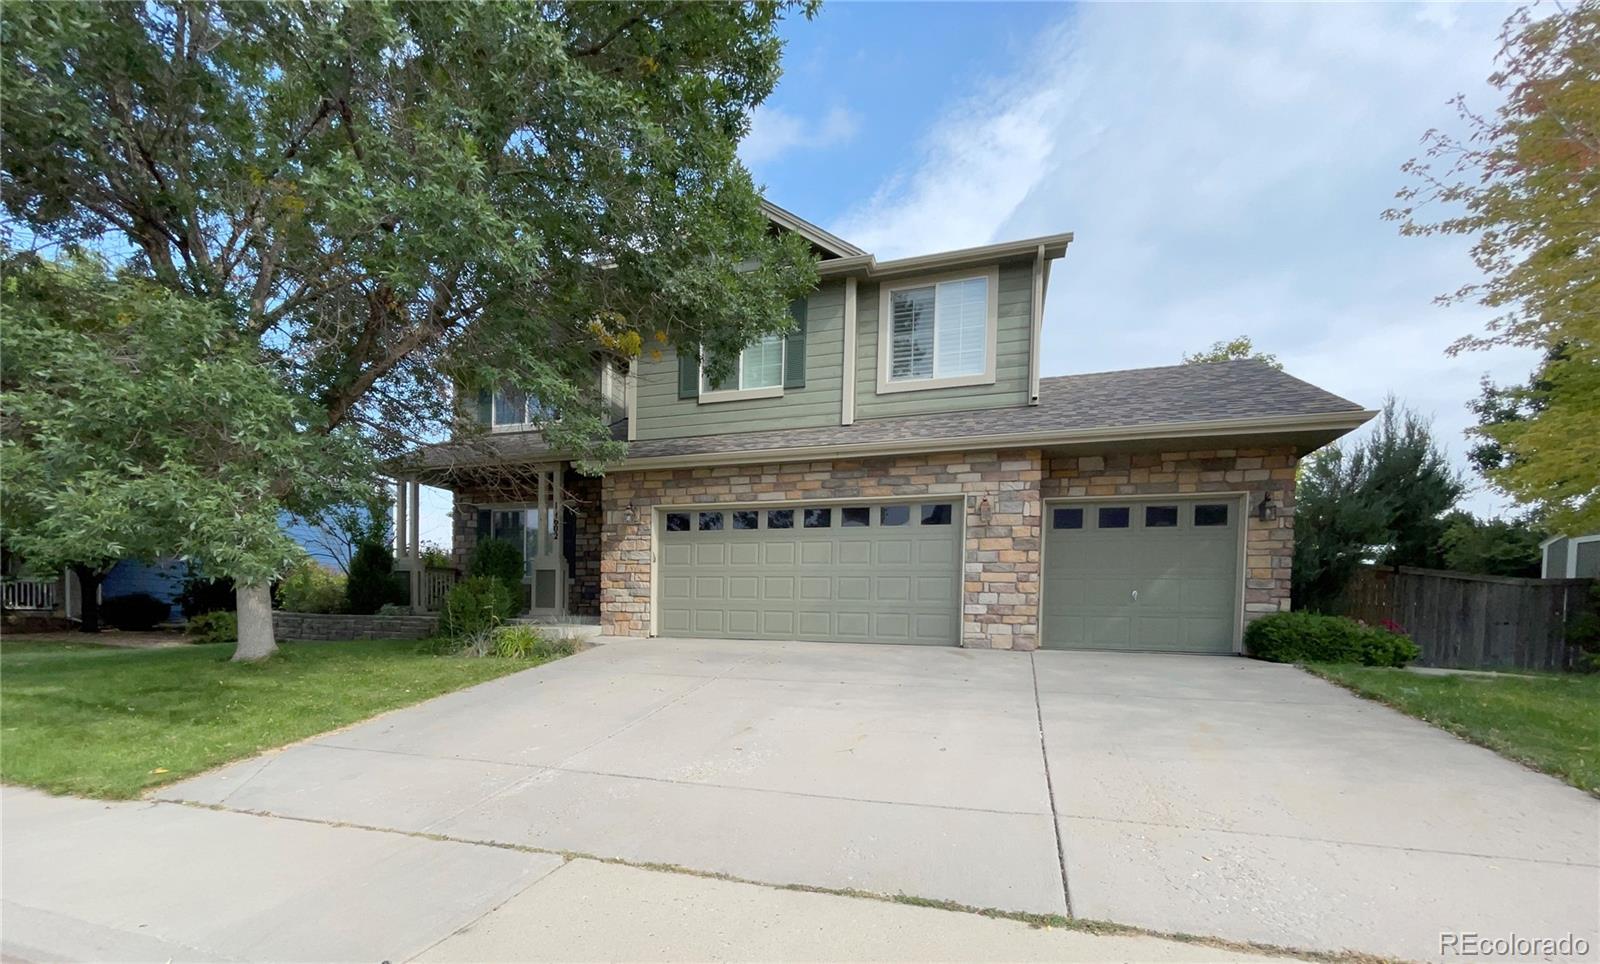 14602  detroit way, thornton sold home. Closed on 2024-04-30 for $715,000.